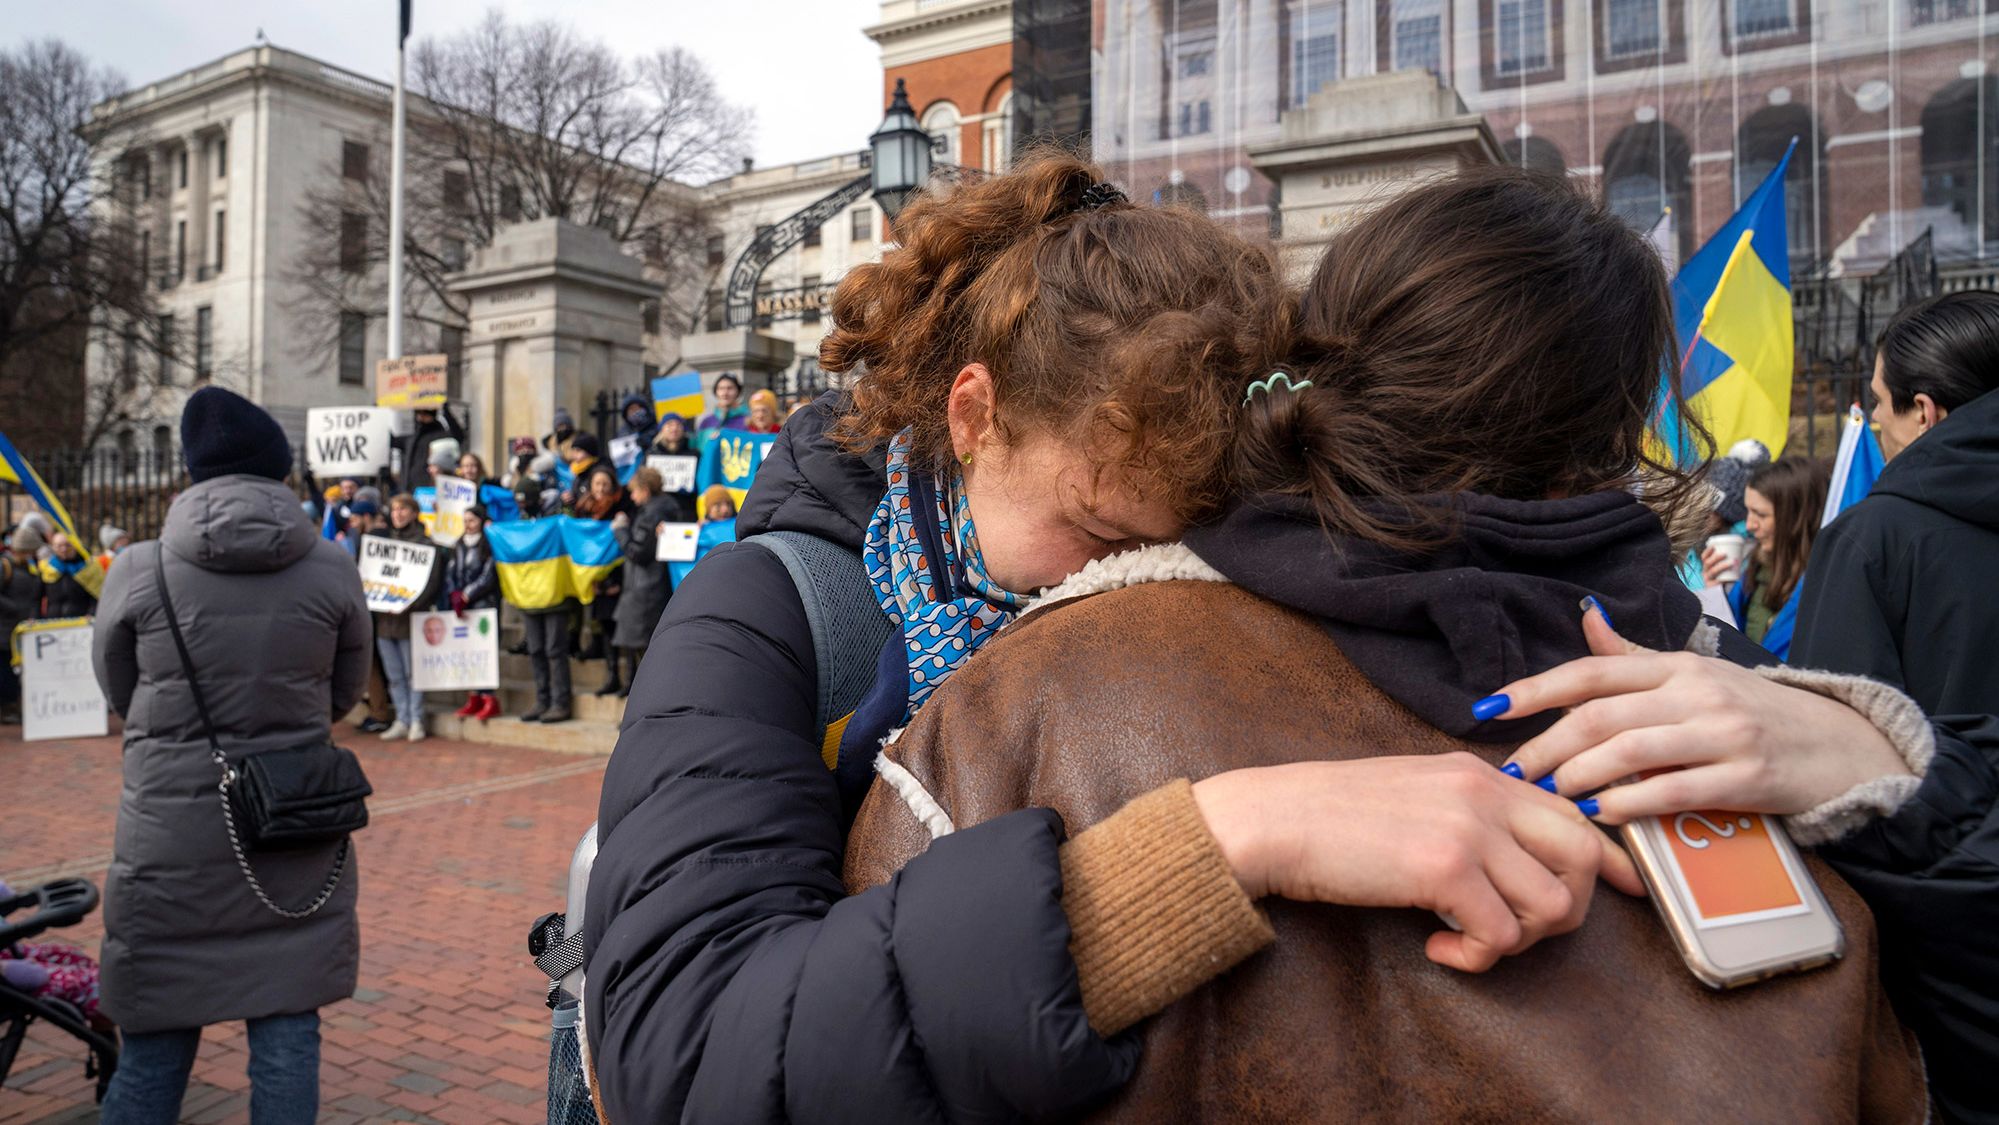 Protesters gather outside the Massachusetts State House in Boston on February 24.